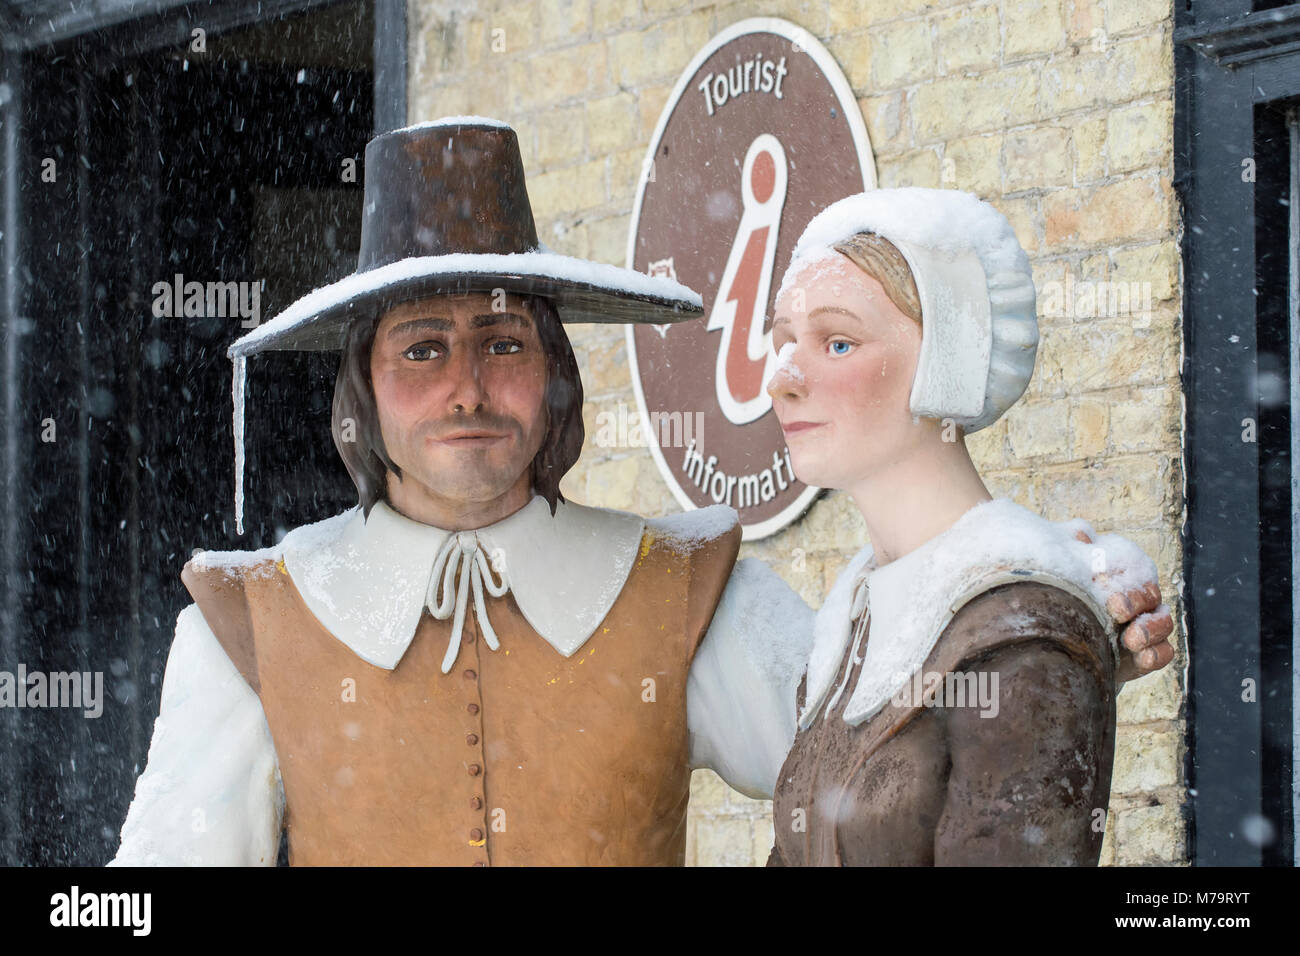 Figures of a man and woman outside Oliver Cromwell house in falling snow, Ely, Cambridgeshire, England Stock Photo